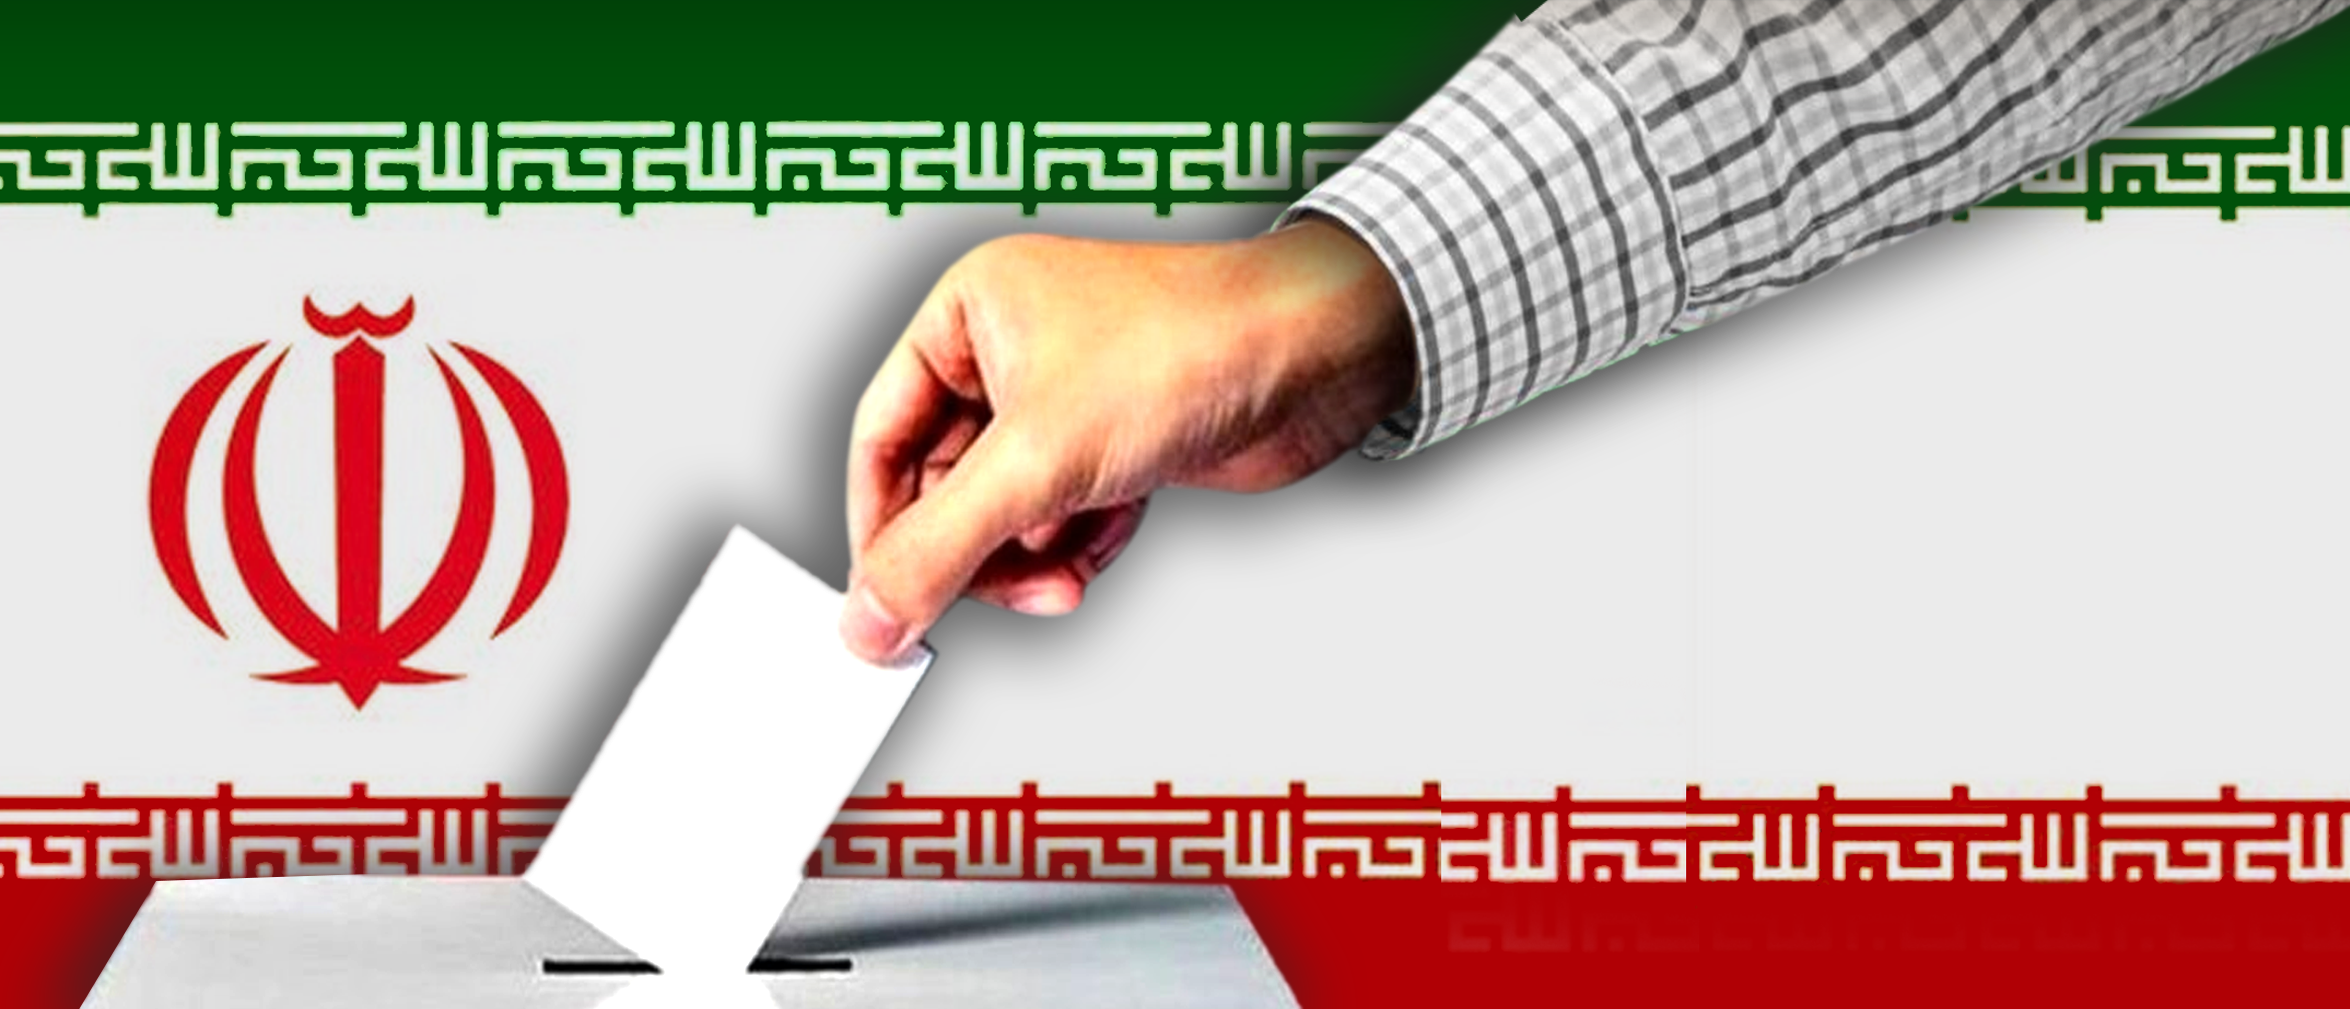 Race heating up in Iran ahead of major elections